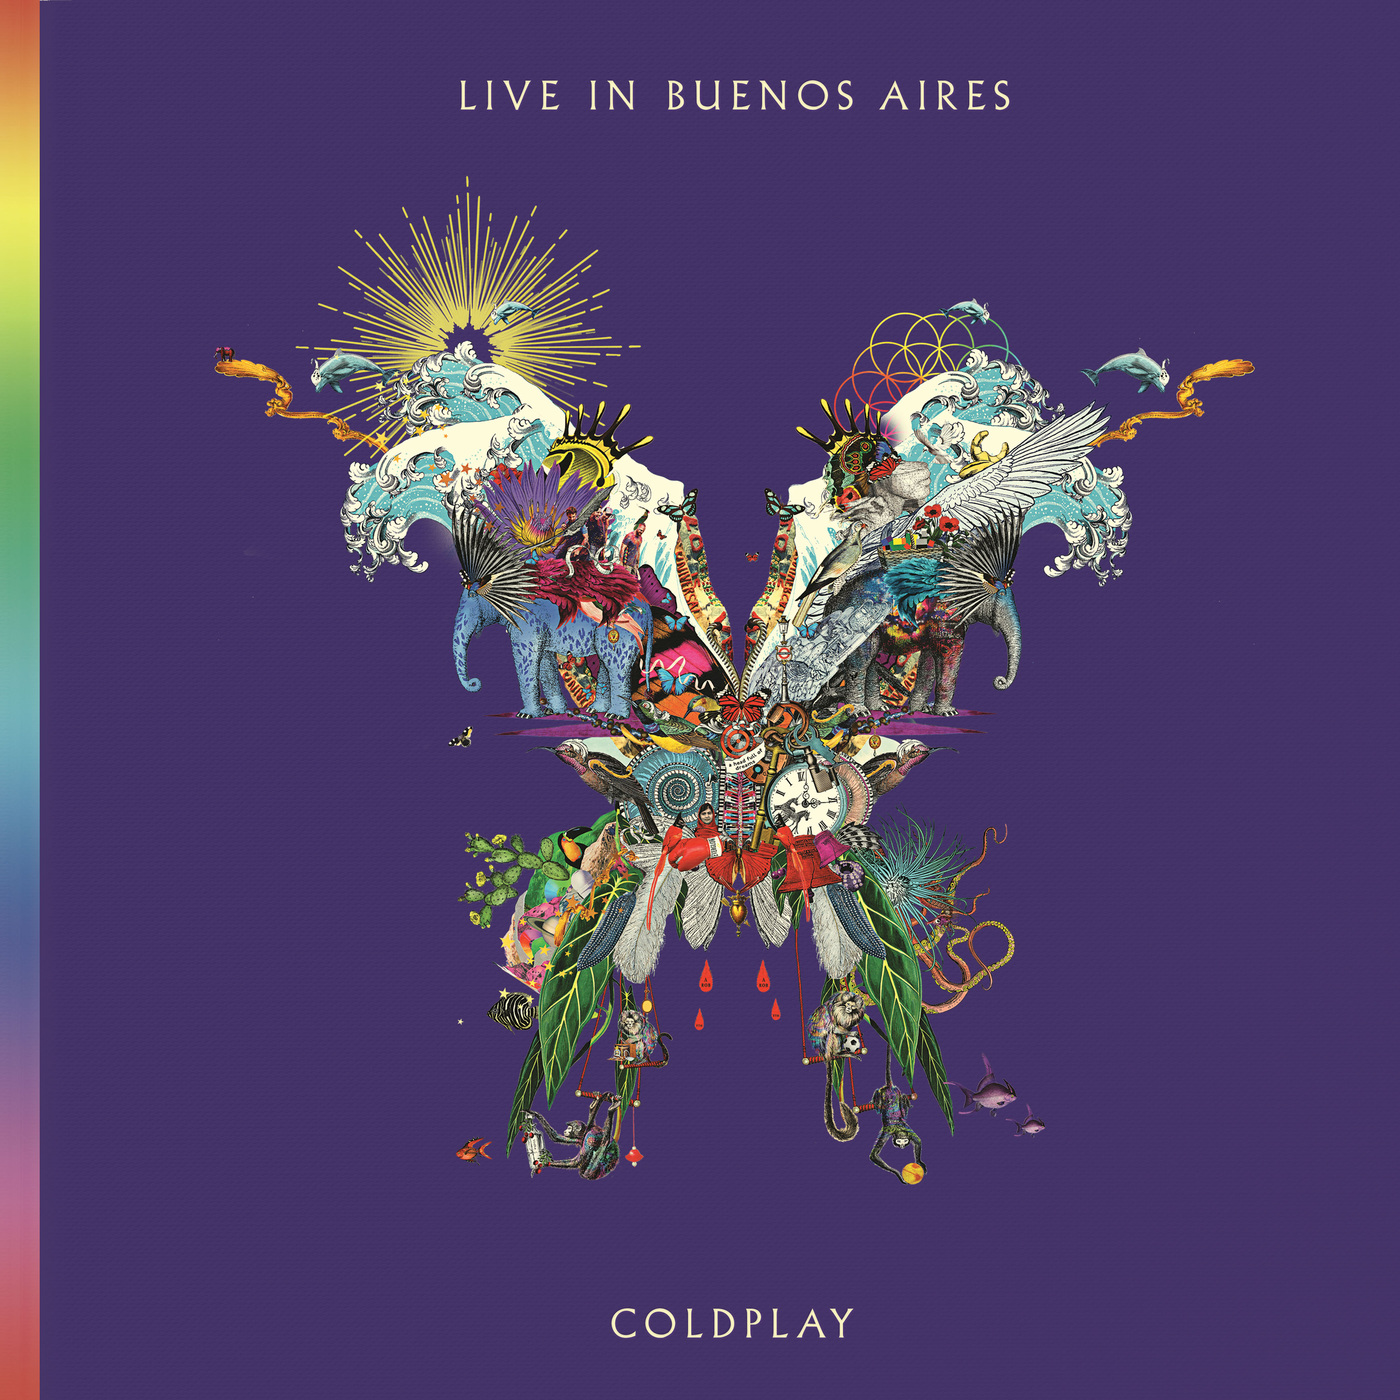 Coldplay free album downloads